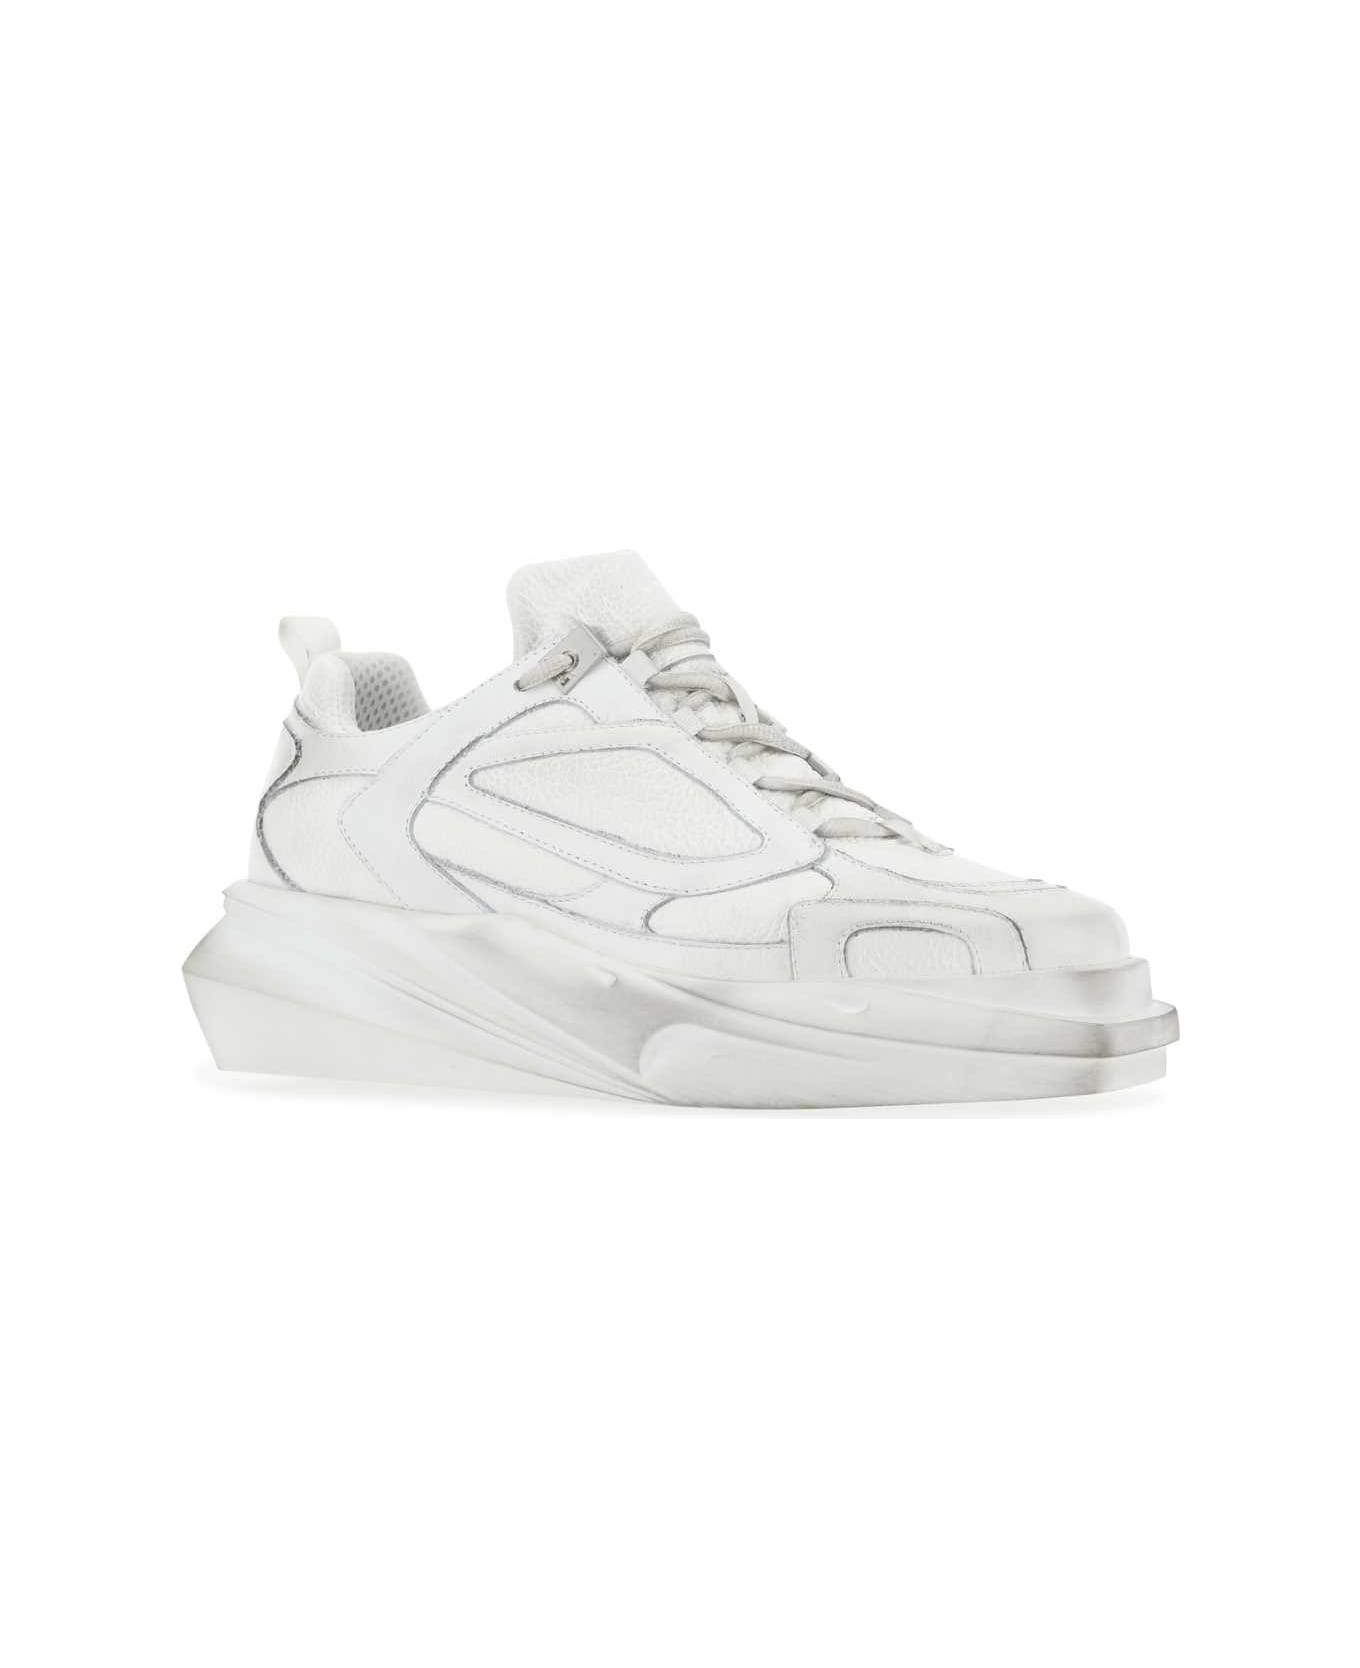 1017 ALYX 9SM White Leather Hiking Sneakers - WTH0001